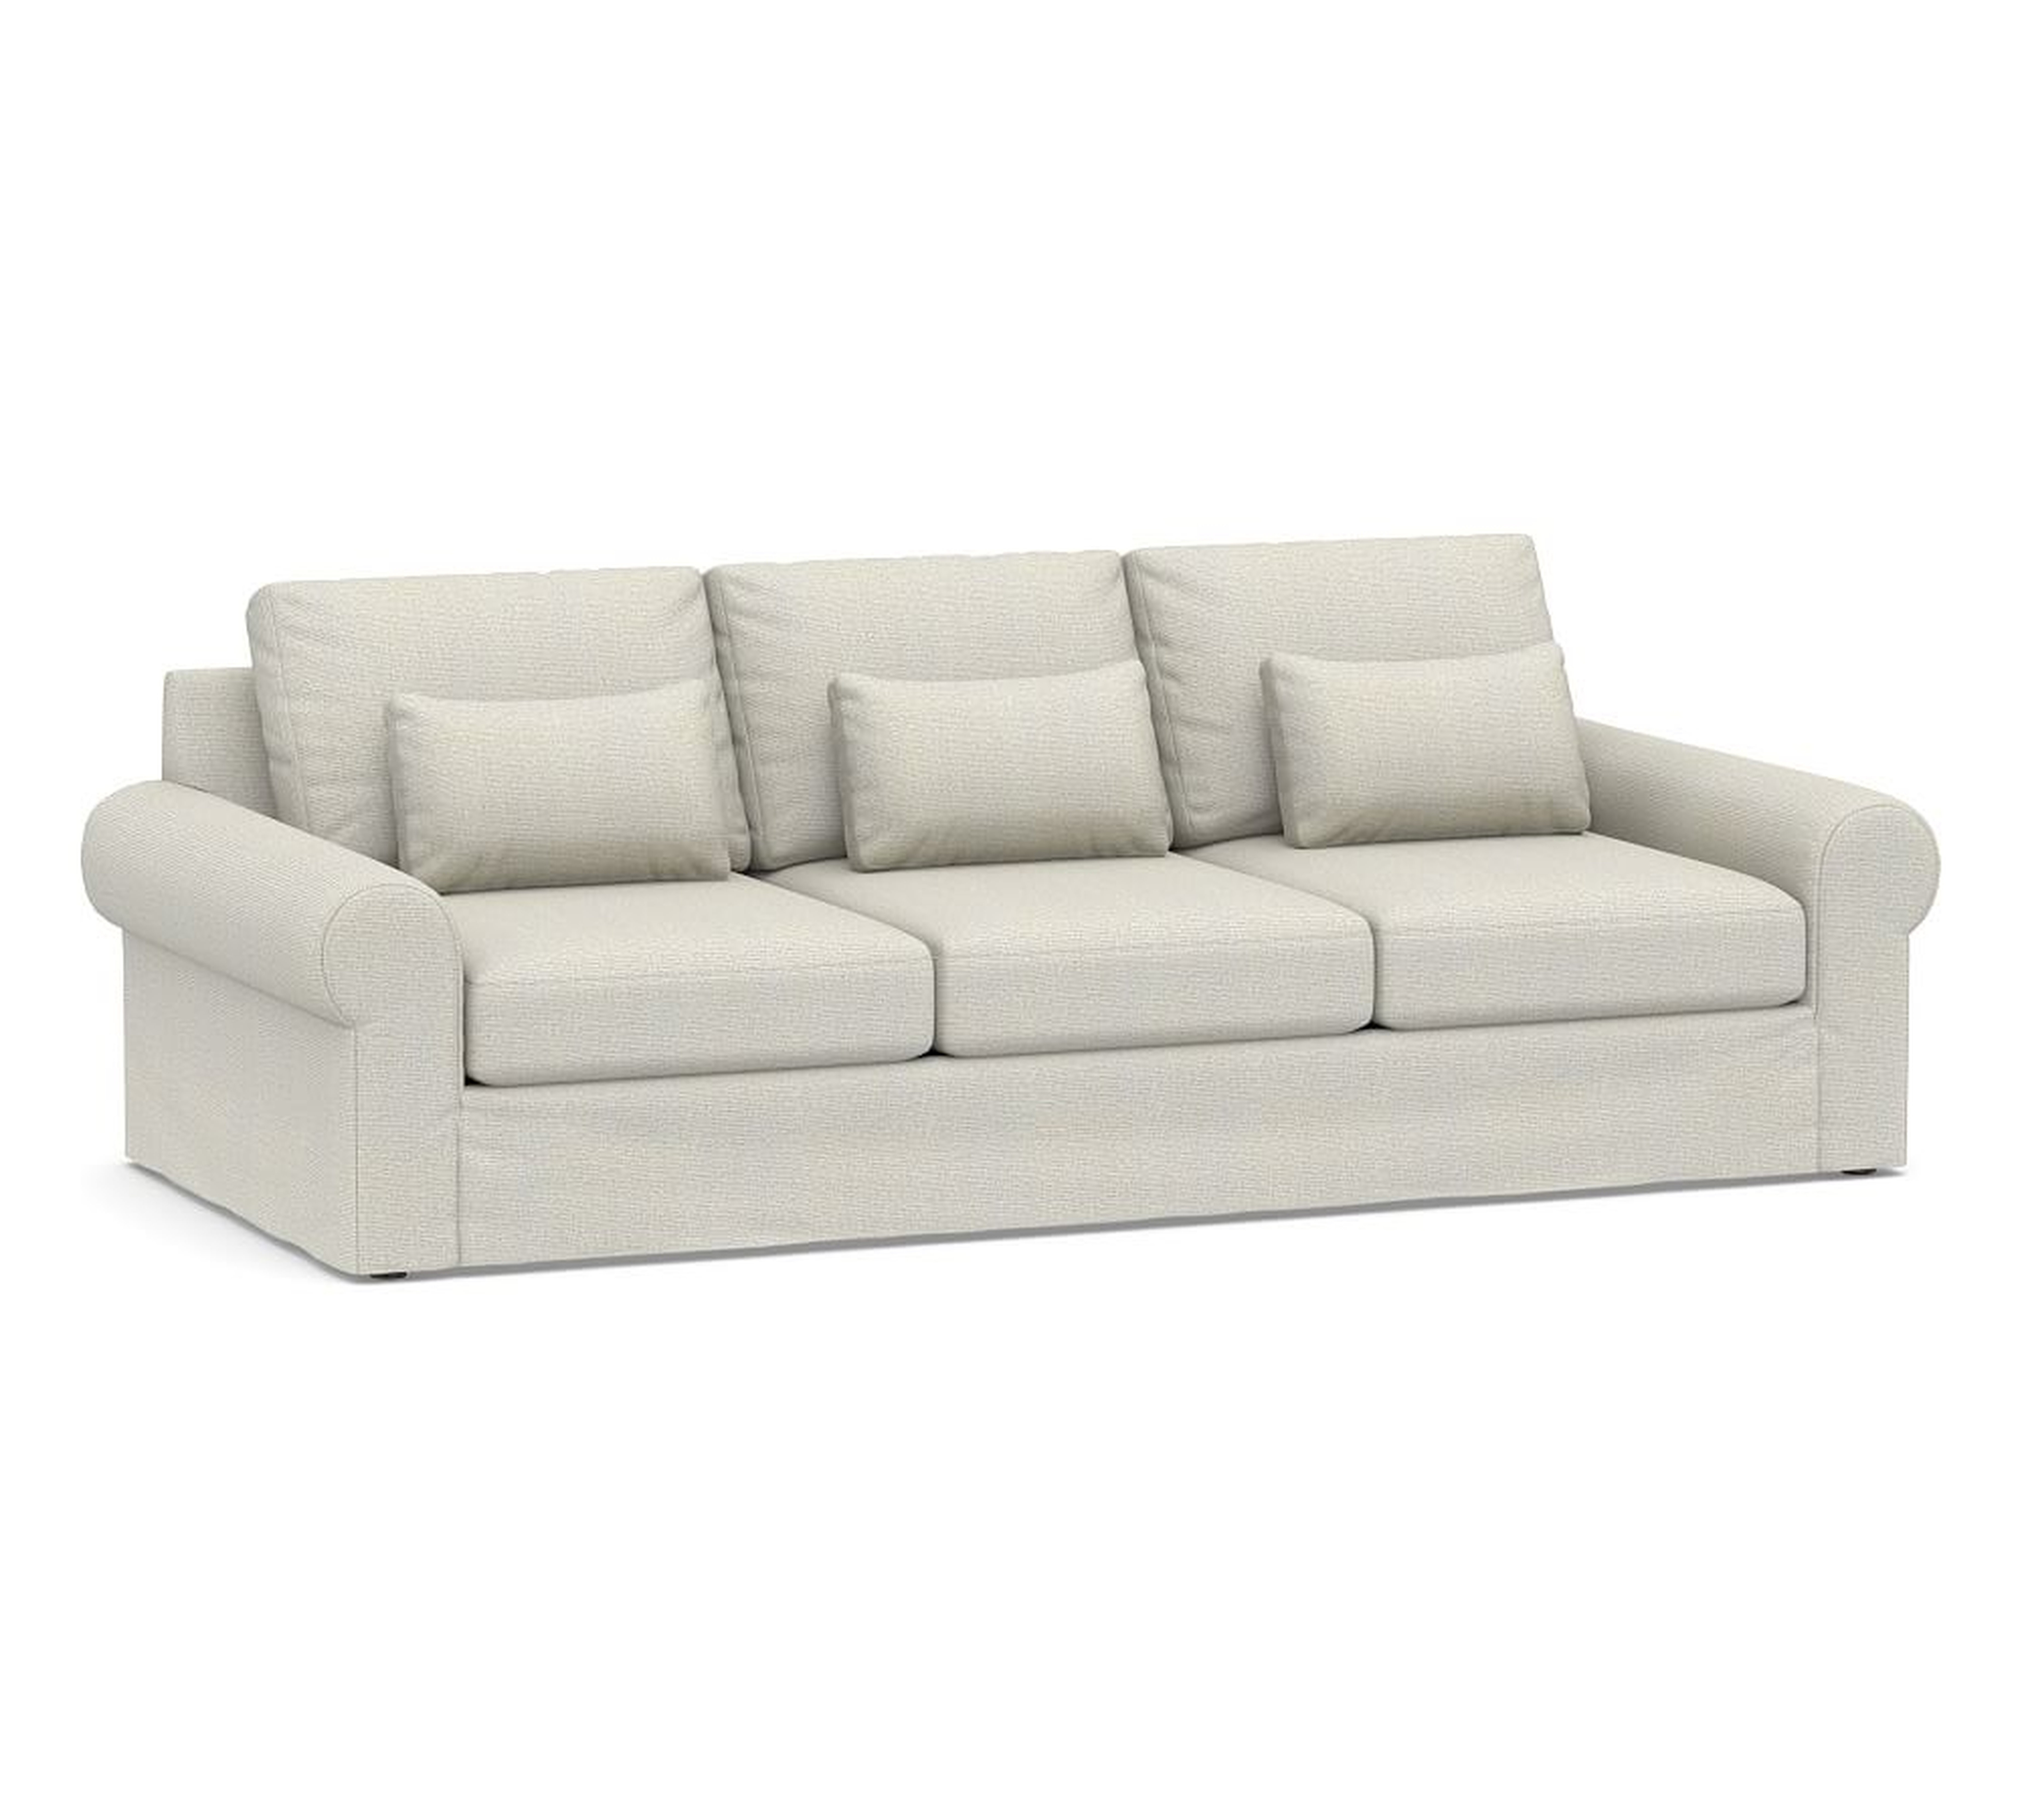 Big Sur Roll Arm Slipcovered Deep Seat Grand Sofa 106", Down Blend Wrapped Cushions, Performance Heathered Basketweave Dove - Pottery Barn